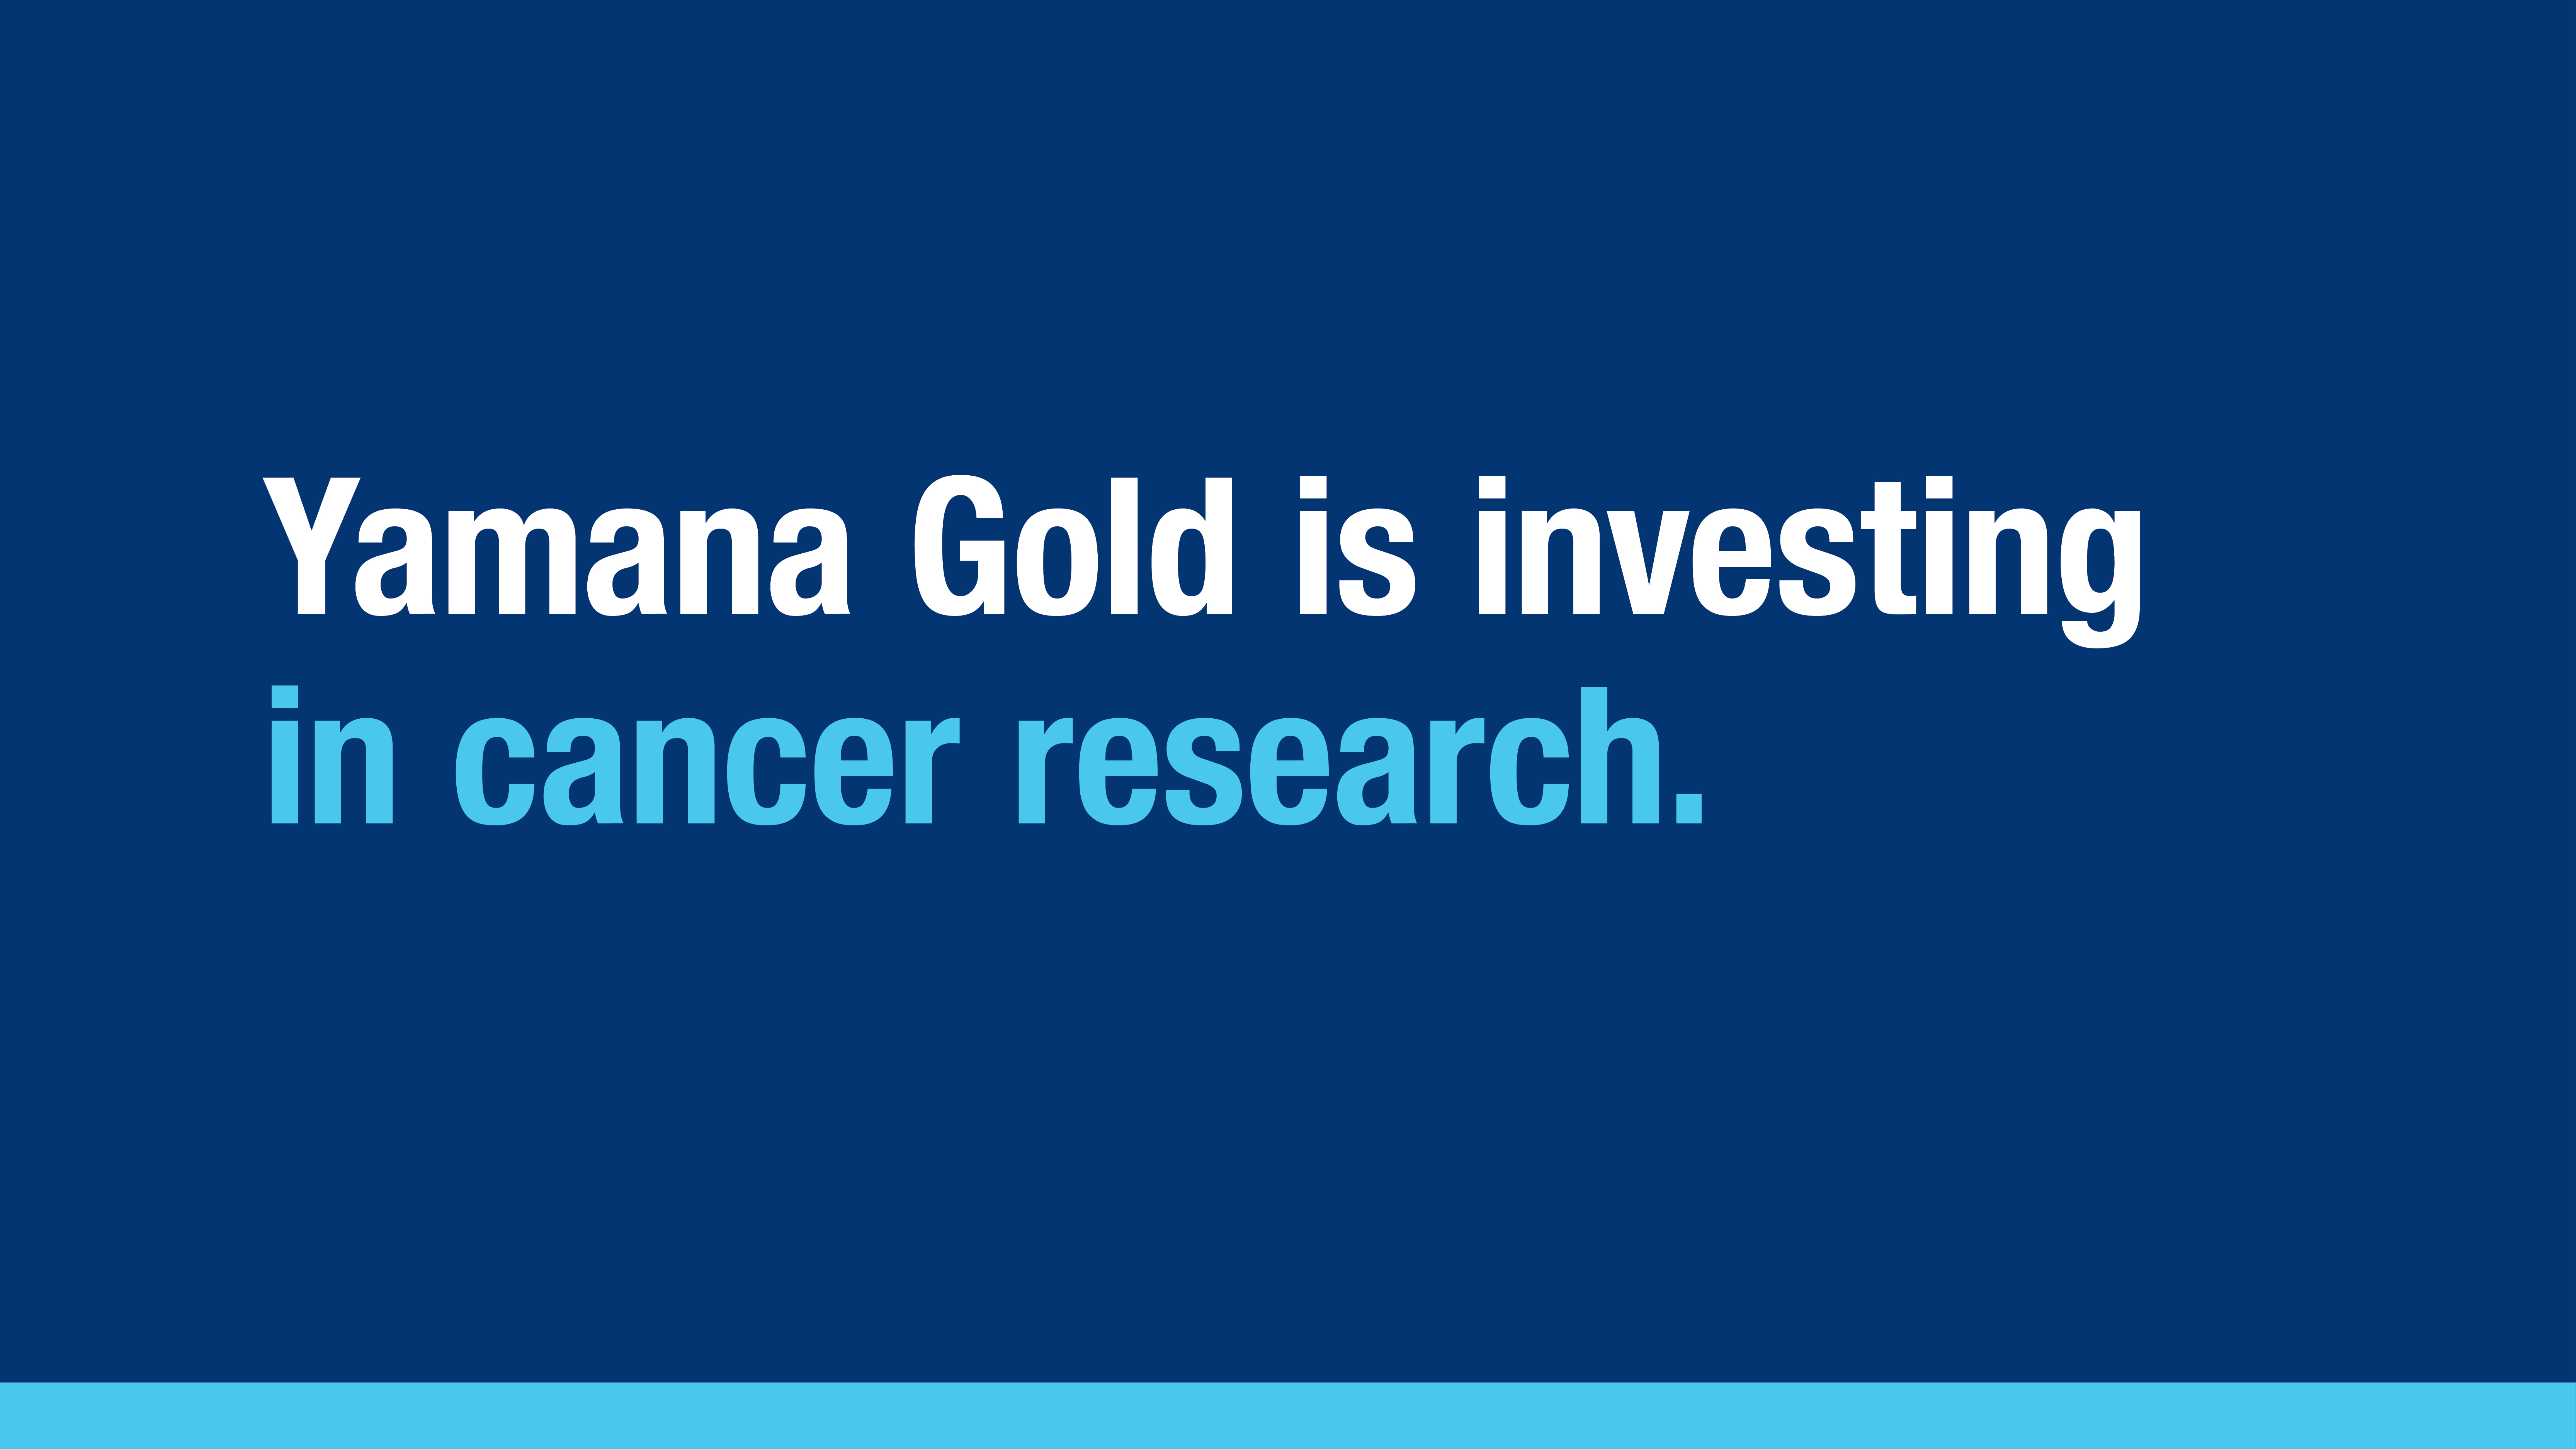 Yamana Gold Inc. accelerates the pace of cancer discovery with a $4 million gift